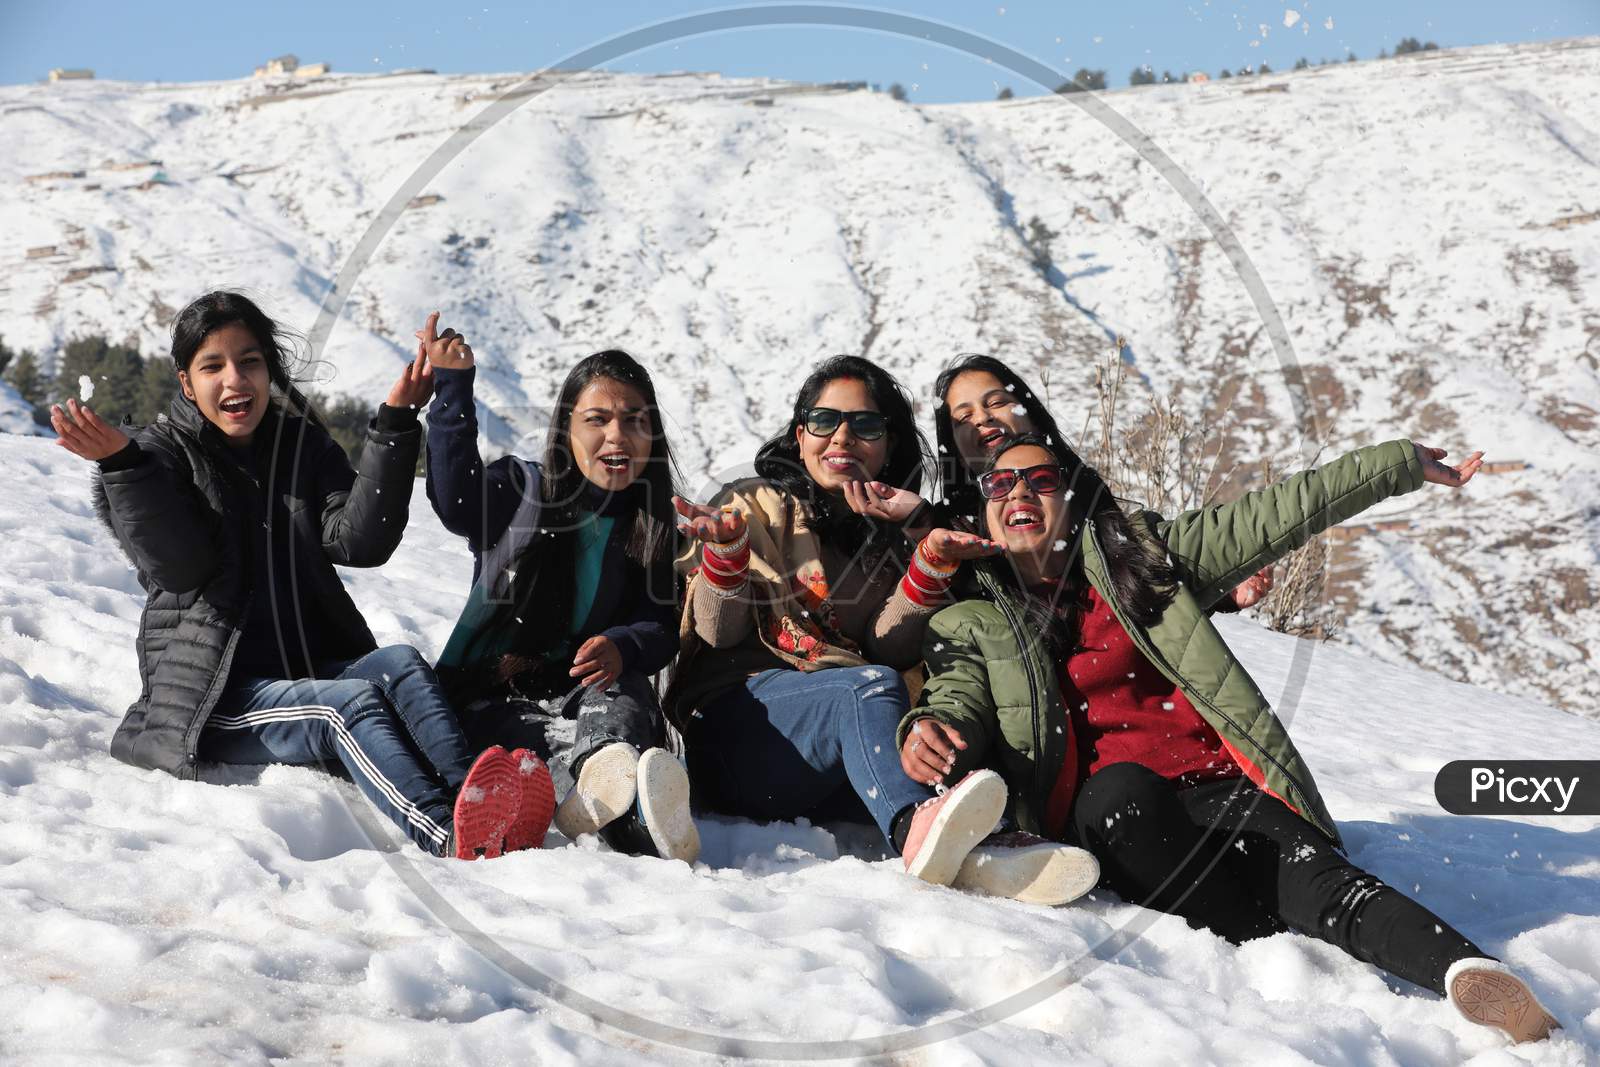 Tourist Play With Snow At Nathatop Near Patnitop About 110Km From Jammu On Sunday.10 Jan,2021.